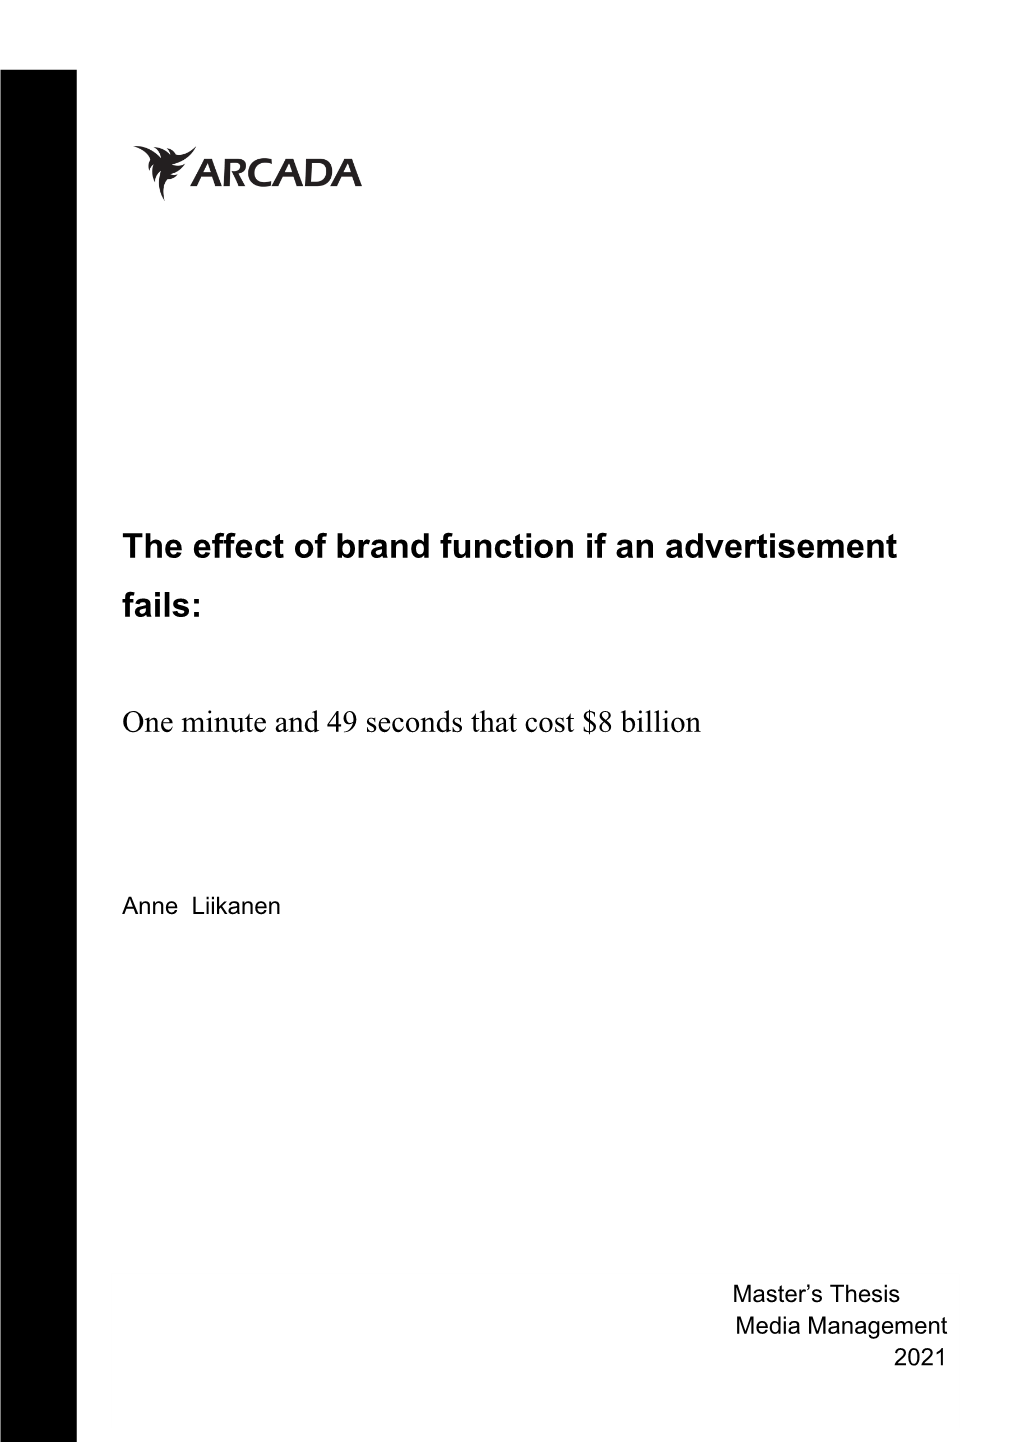 The Effect of Brand Function If an Advertisement Fails